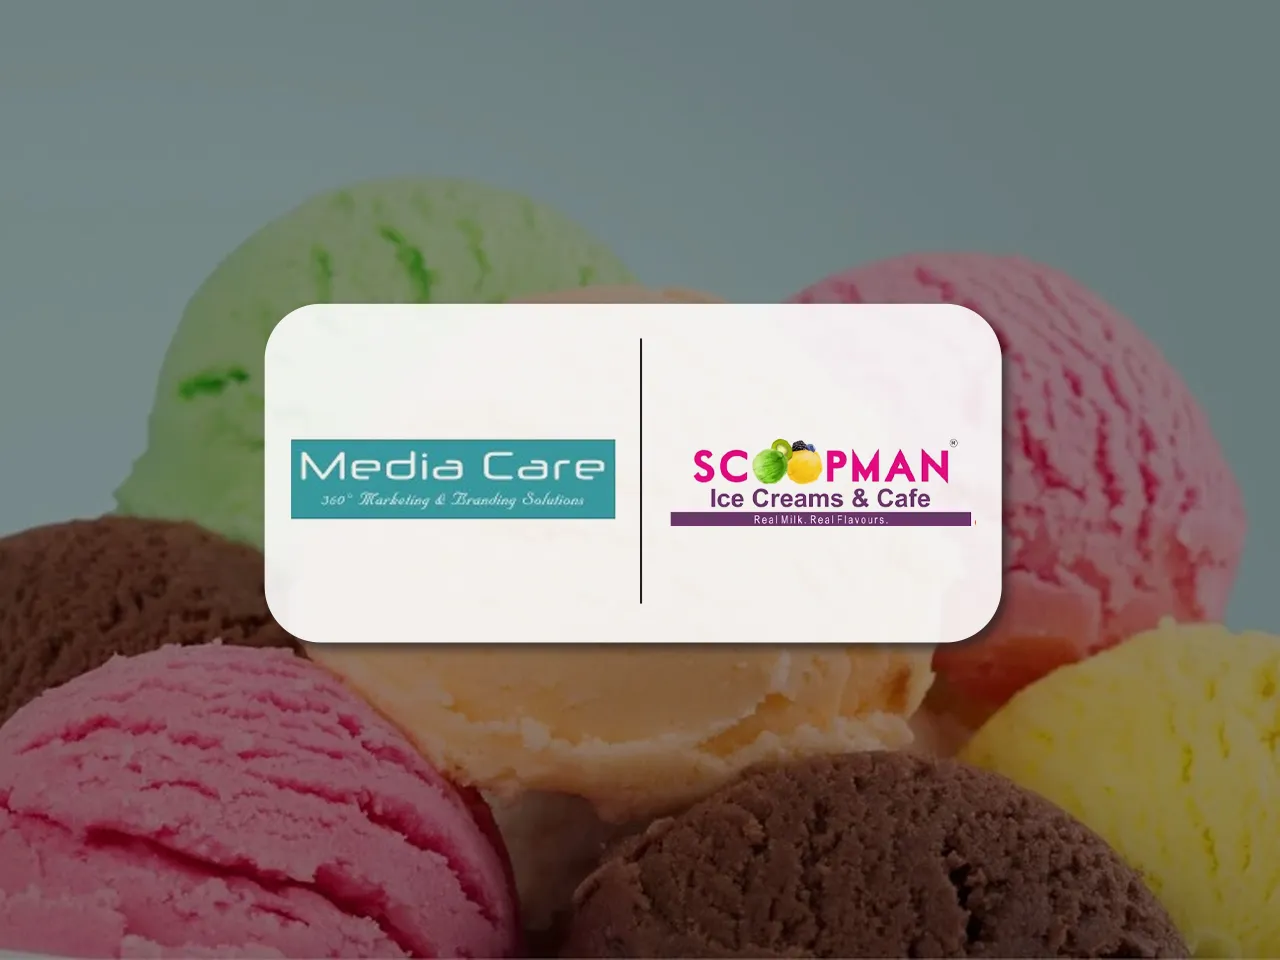 Media Care bags the digital marketing mandate for ScoopMan Ice-Creams & Cafe